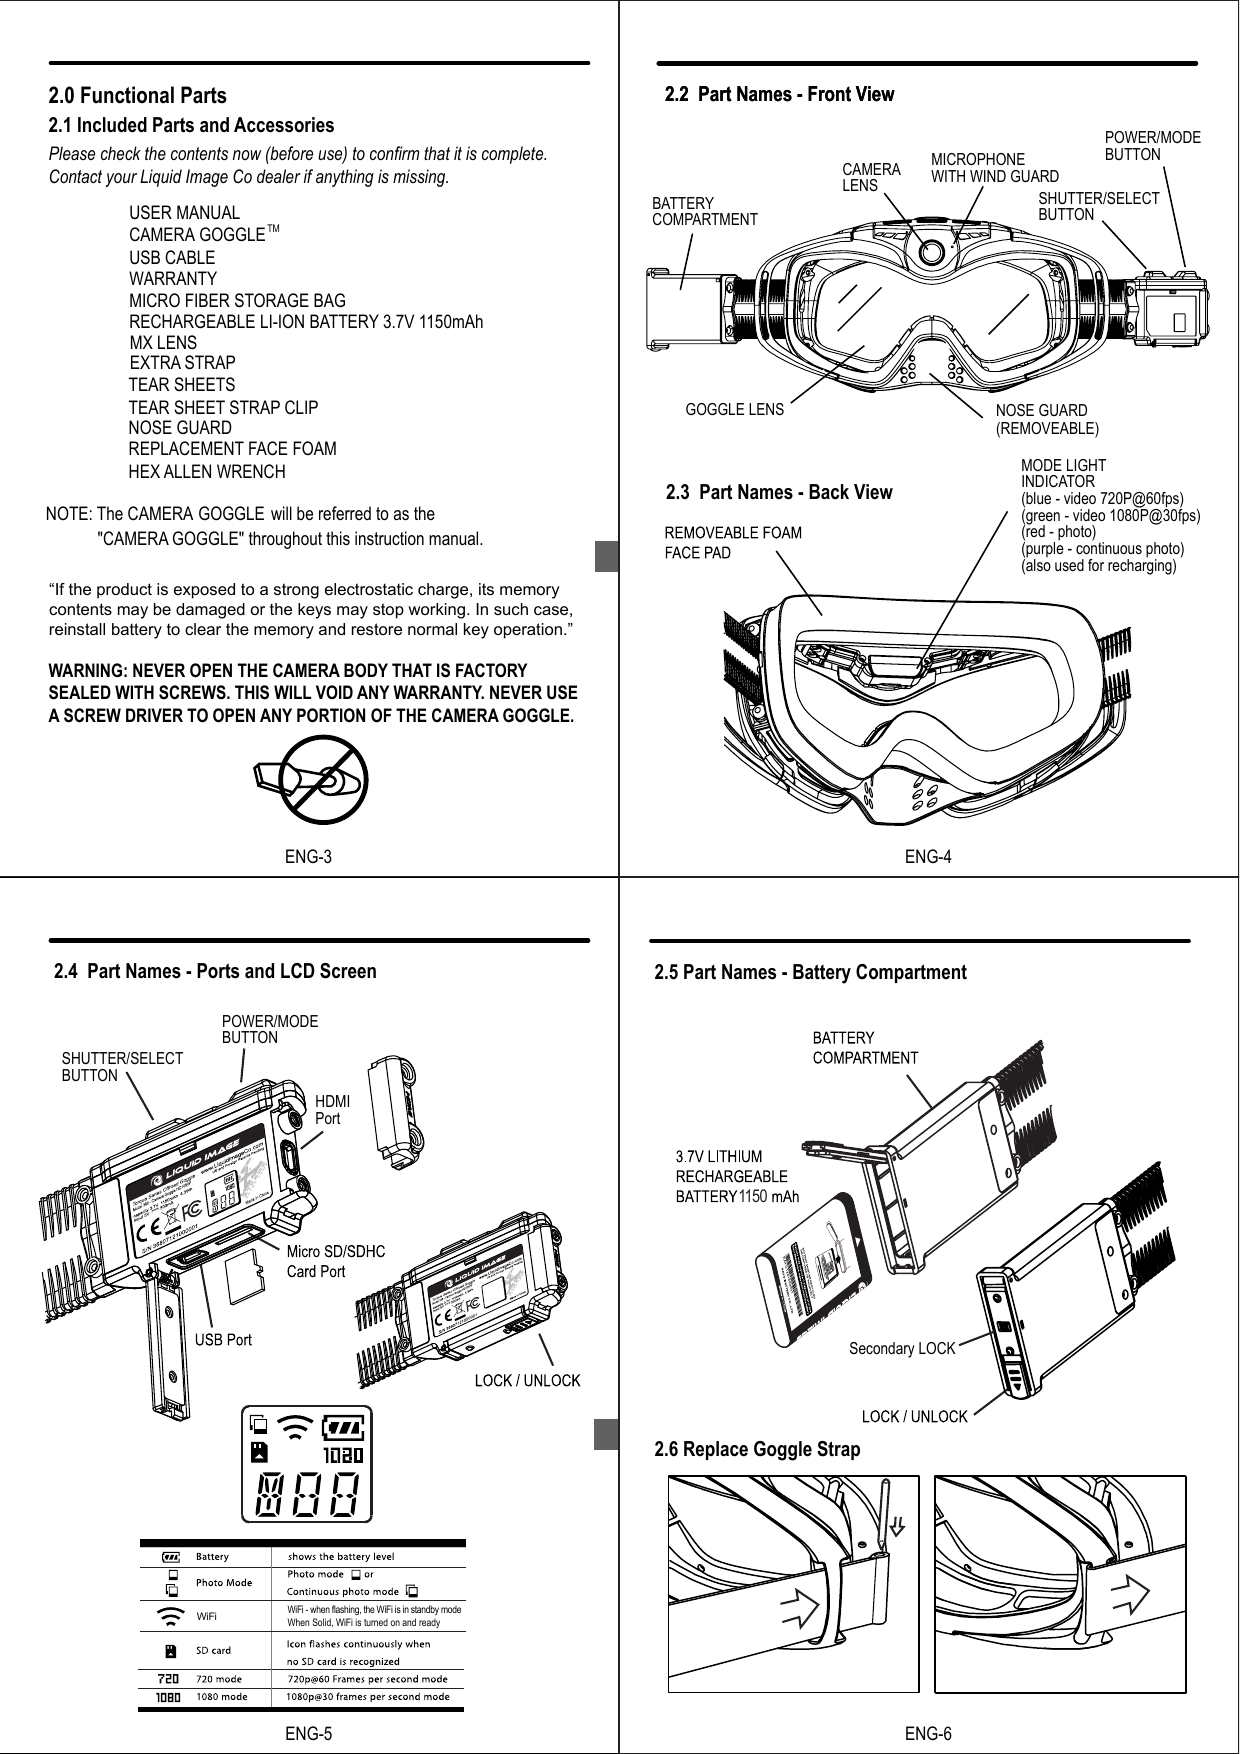 ENG-32.0 Functional Parts2.1 Included Parts and AccessoriesPlease check the contents now (before use) to confirm that it is complete. Contact your Liquid Image Co dealer if anything is missing.NOTE: The CAMERA GOGGLE will be referred to as the &quot;CAMERA GOGGLE&quot; throughout this instruction manual.WARNING: NEVER OPEN THE CAMERA BODY THAT IS FACTORYSEALED WITH SCREWS. THIS WILL VOID ANY WARRANTY. NEVER USE A SCREW DRIVER TO OPEN ANY PORTION OF THE CAMERA GOGGLE.“If the product is exposed to a strong electrostatic charge, its memory contents may be damaged or the keys may stop working. In such case, reinstall battery to clear the memory and restore normal key operation.” ENG-32.4  Part Names - Ports and LCD ScreenENG-5POWER/MODEBUTTONSHUTTER/SELECTBUTTONHDMI Port WiFi - when flashing, the WiFi is in standby modeWhen Solid, WiFi is turned on and readyWiFi2.2  Part Names - Front View2.3  Part Names - Back ViewCAMERALENSPOWER/MODEBUTTONSHUTTER/SELECTBUTTONBATTERYCOMPARTMENTGOGGLE LENS NOSE GUARD(REMOVEABLE)2.2  Part Names - Front ViewMICROPHONEWITH WIND GUARDENG-4MODE LIGHT INDICATOR(blue - video 720P@60fps)(green - video 1080P@30fps)(red - photo)(purple - continuous photo)(also used for recharging)Secondary LOCK 2.5 Part Names - Battery Compartment2.6 Replace Goggle Strap1150ENG-6USER MANUALCAMERA GOGGLEUSB CABLEWARRANTYMICRO FIBER STORAGE BAGRECHARGEABLE LI-ION BATTERY 3.7V 1150mAh  MX LENS EXTRA STRAPTMTEAR SHEETSNOSE GUARDTEAR SHEET STRAP CLIPREPLACEMENT FACE FOAMHEX ALLEN WRENCH